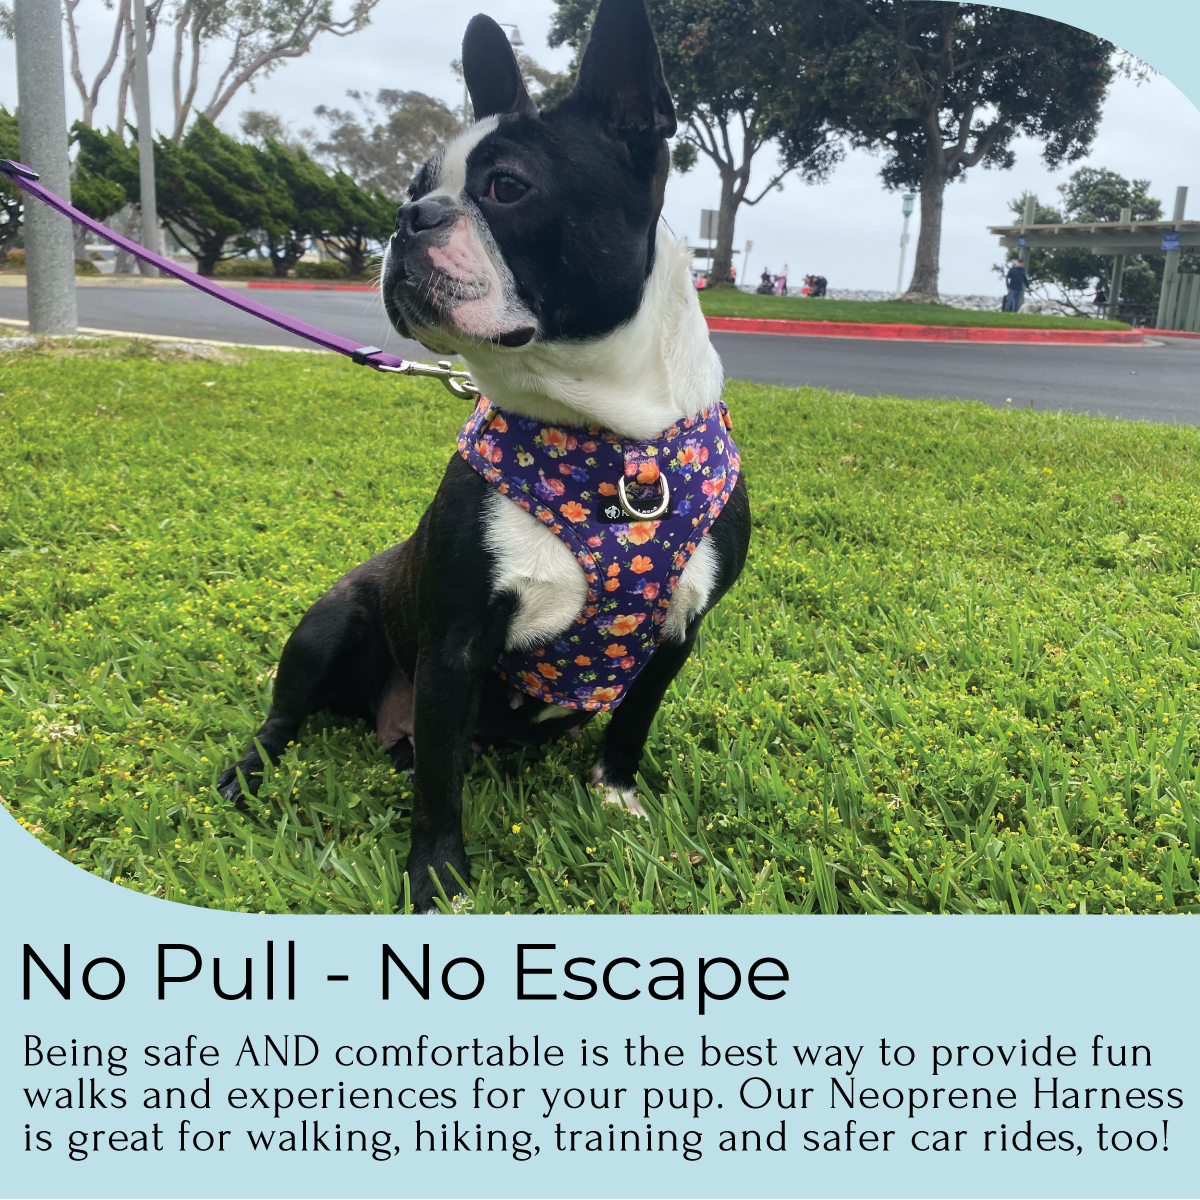 a photo of a black and white French bulldog wearing an adjustable harness in purple. The dog is sitting on grass and below it is text indicating no pull no escape features of the harness